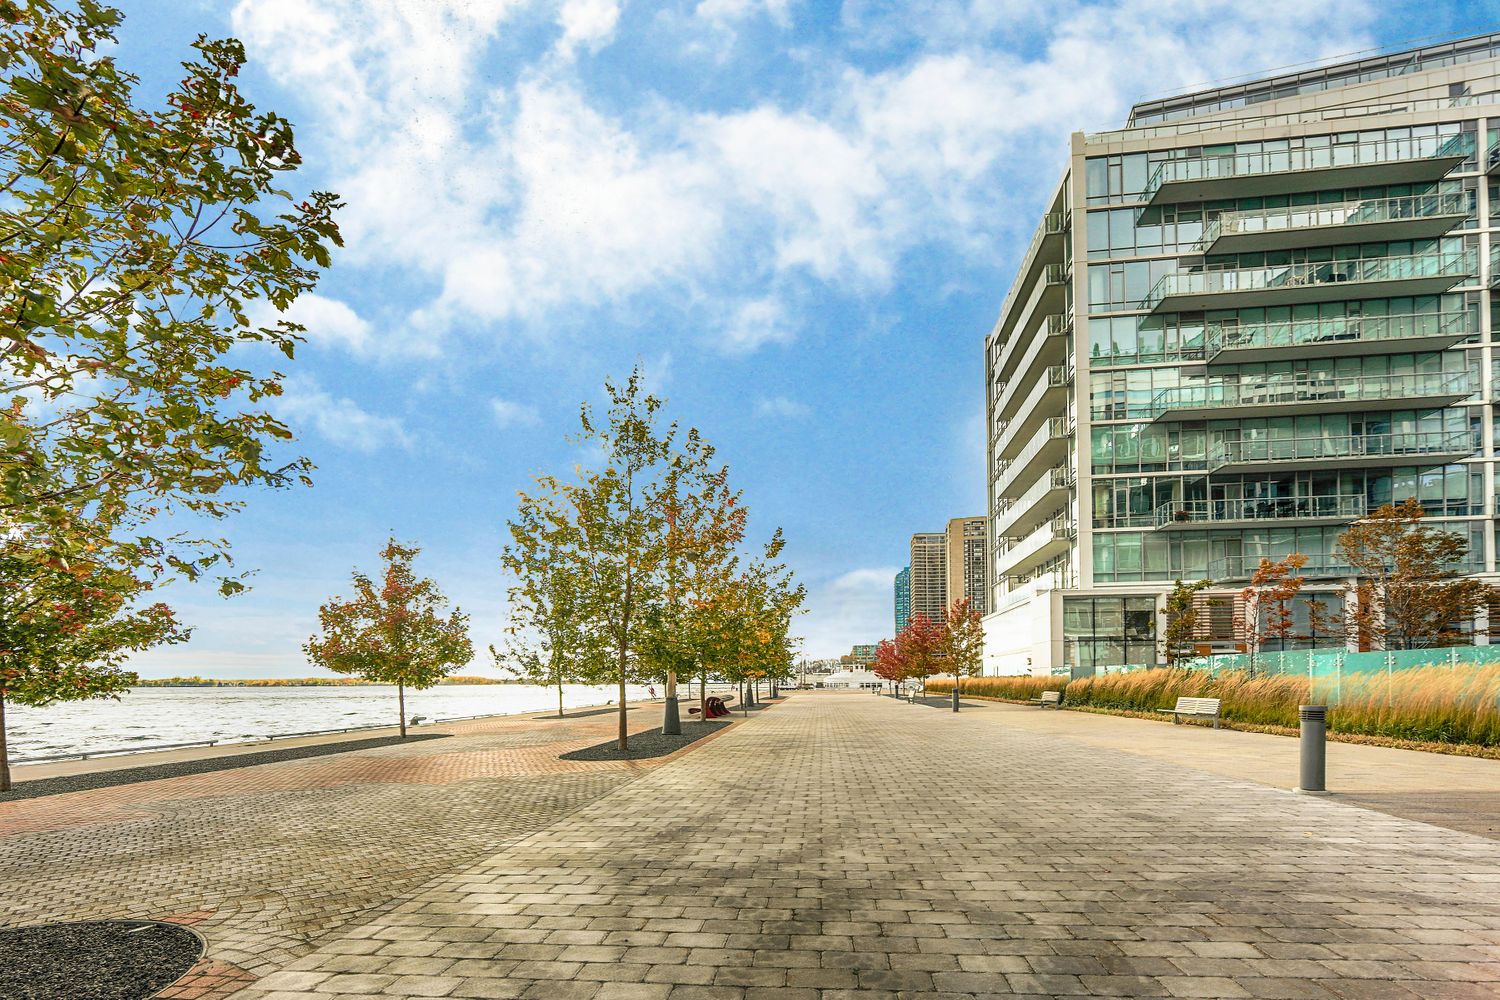 29 Queens Quay E. Pier 27 Phase II Condos is located in  Downtown, Toronto - image #5 of 5